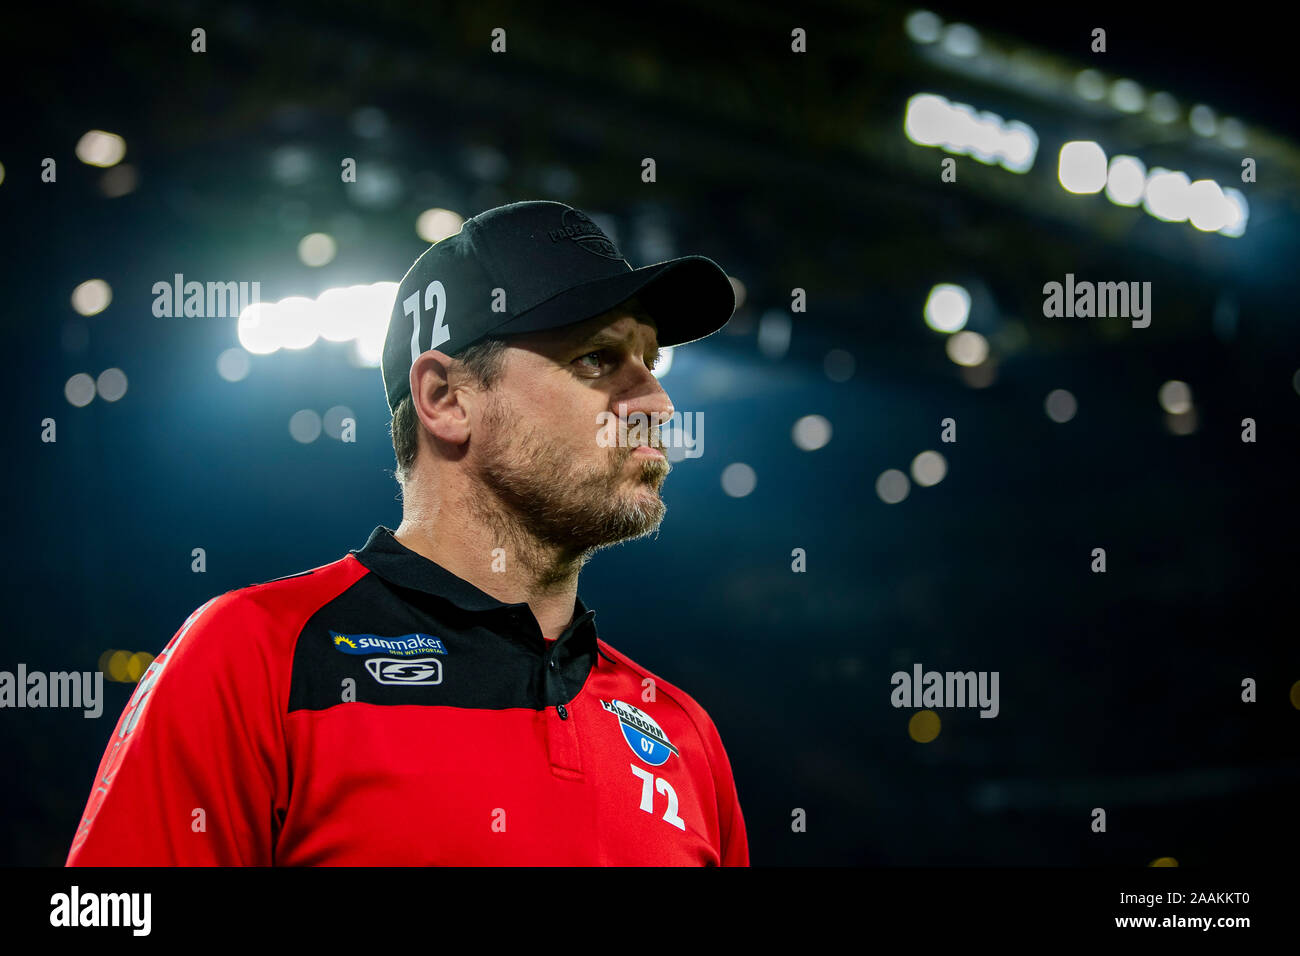 Dortmund, Germany. 22nd Nov, 2019. Soccer: Bundesliga, Borussia Dortmund - SC Paderborn 07, 12th matchday at Signal-Iduna-Park in Dortmund. Paderborn's trainer Steffen Baumgart grimly grimens his face. Credit: David Inderlied/dpa - IMPORTANT NOTE: In accordance with the requirements of the DFL Deutsche Fußball Liga or the DFB Deutscher Fußball-Bund, it is prohibited to use or have used photographs taken in the stadium and/or the match in the form of sequence images and/or video-like photo sequences./dpa/Alamy Live News Stock Photo